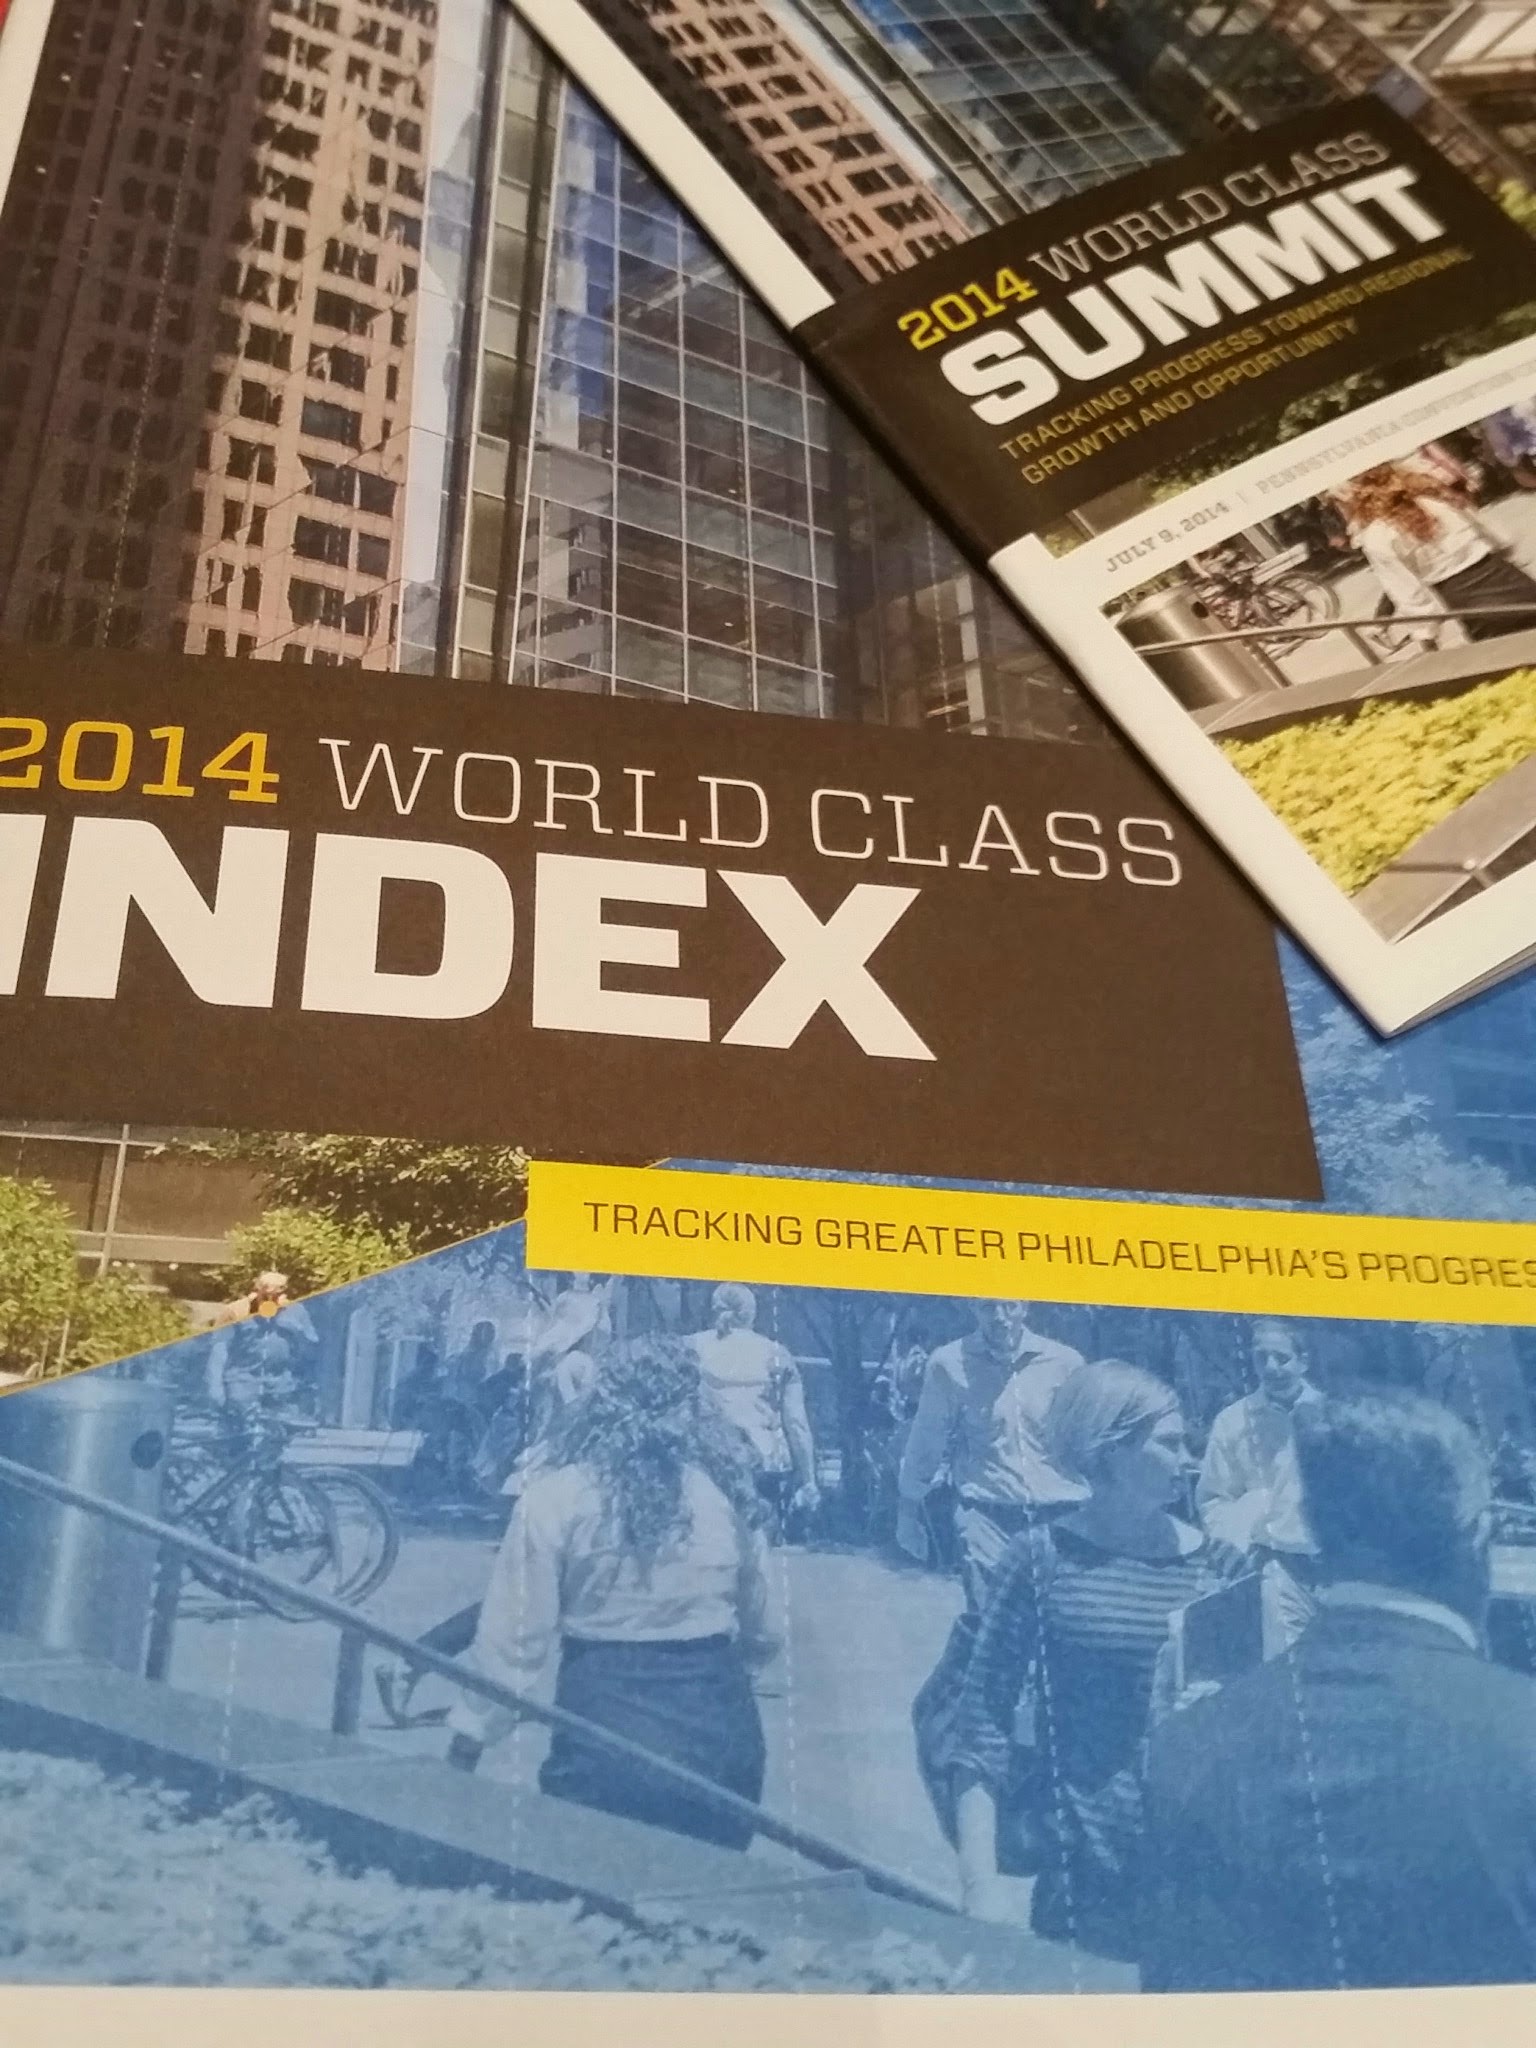 Economy League Releases the World Class Index as Part of the World Class Initiative